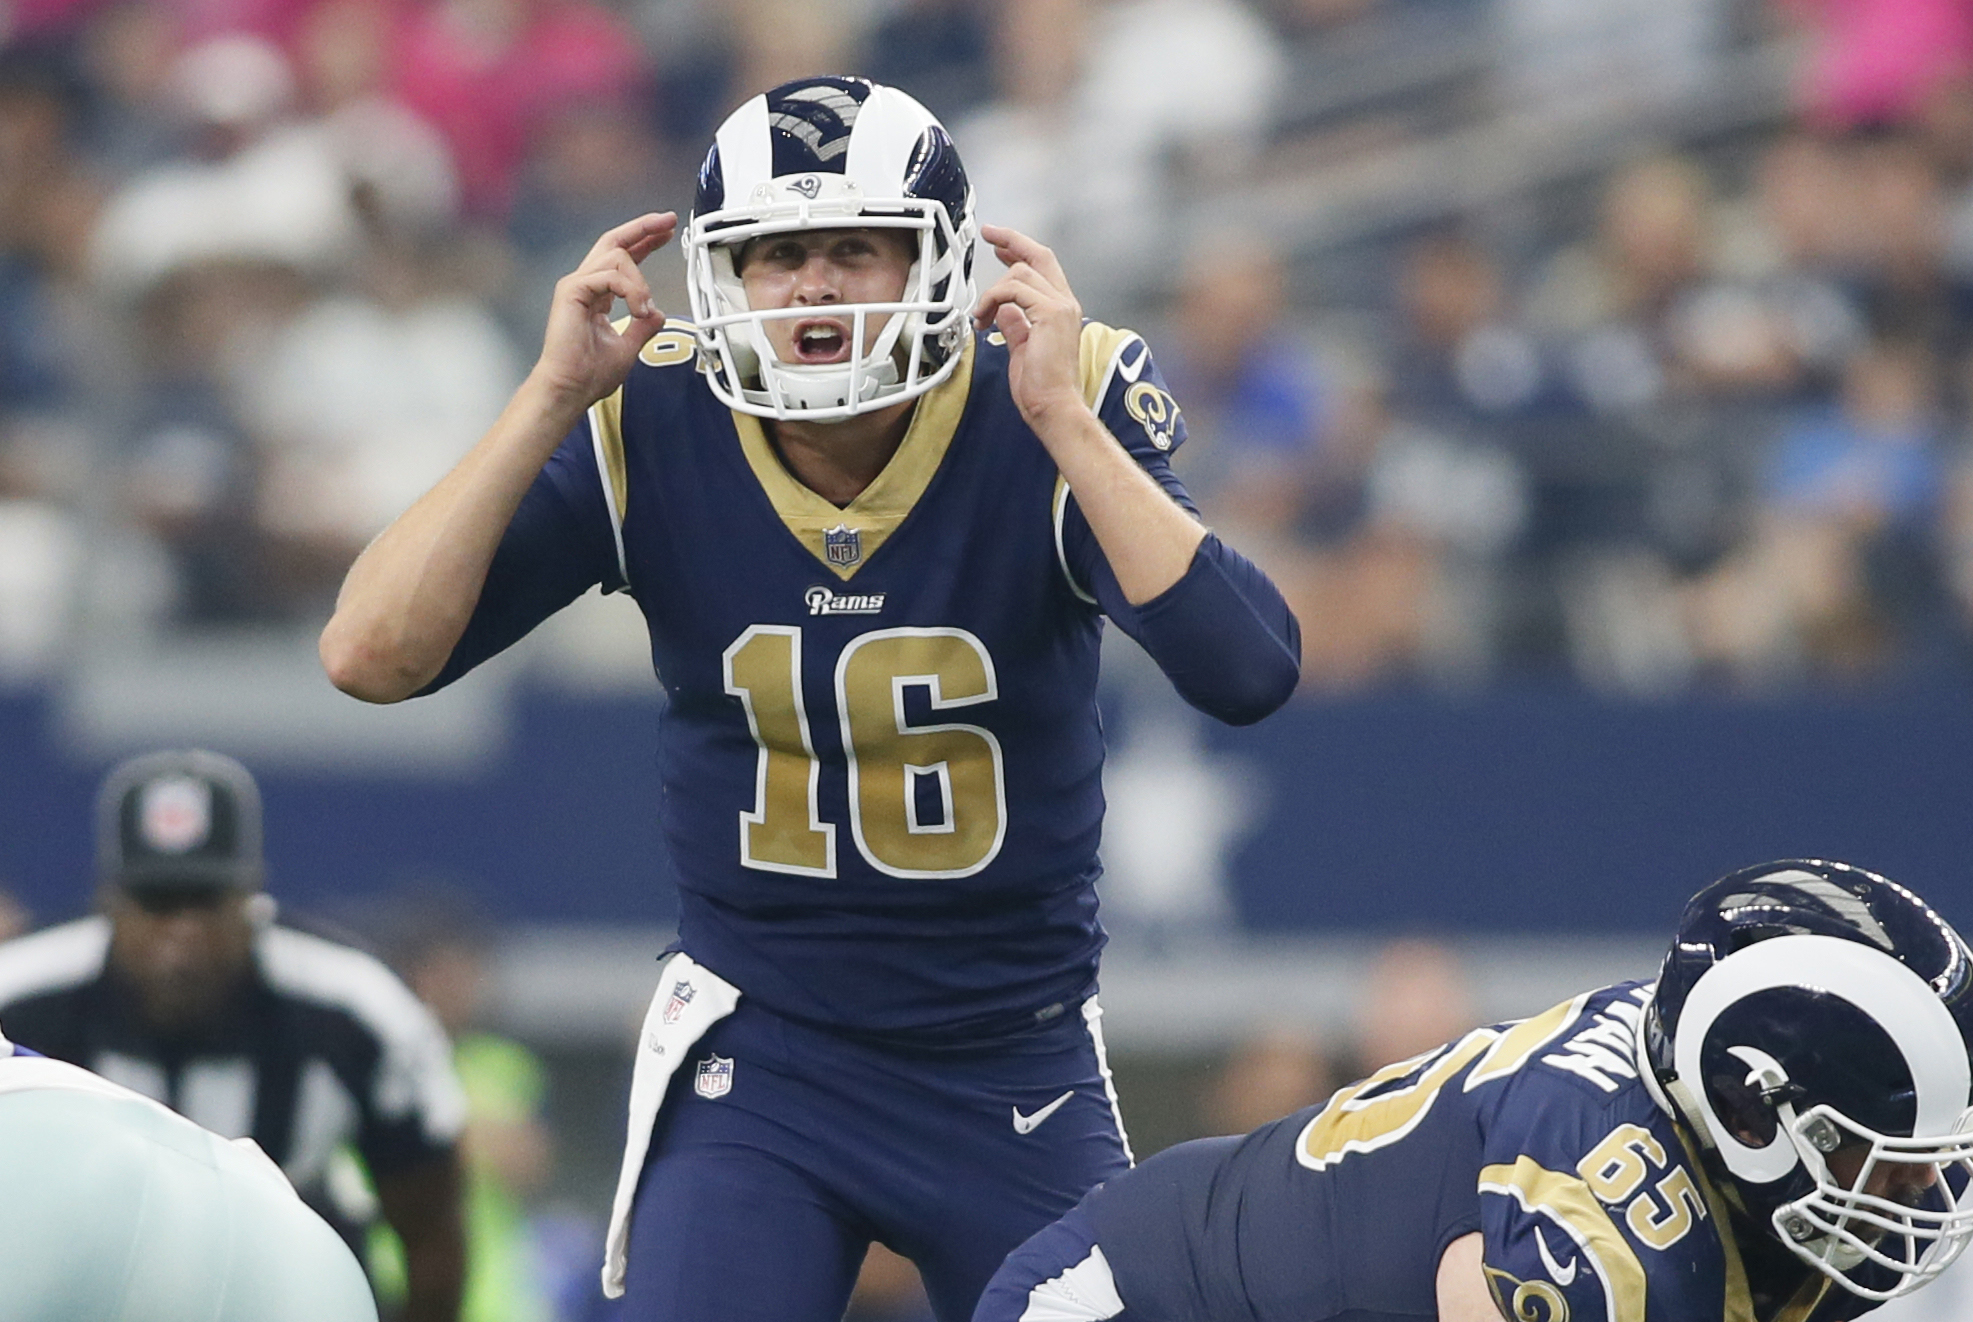 Rams allowed to wear alternate uniforms three times in 2018